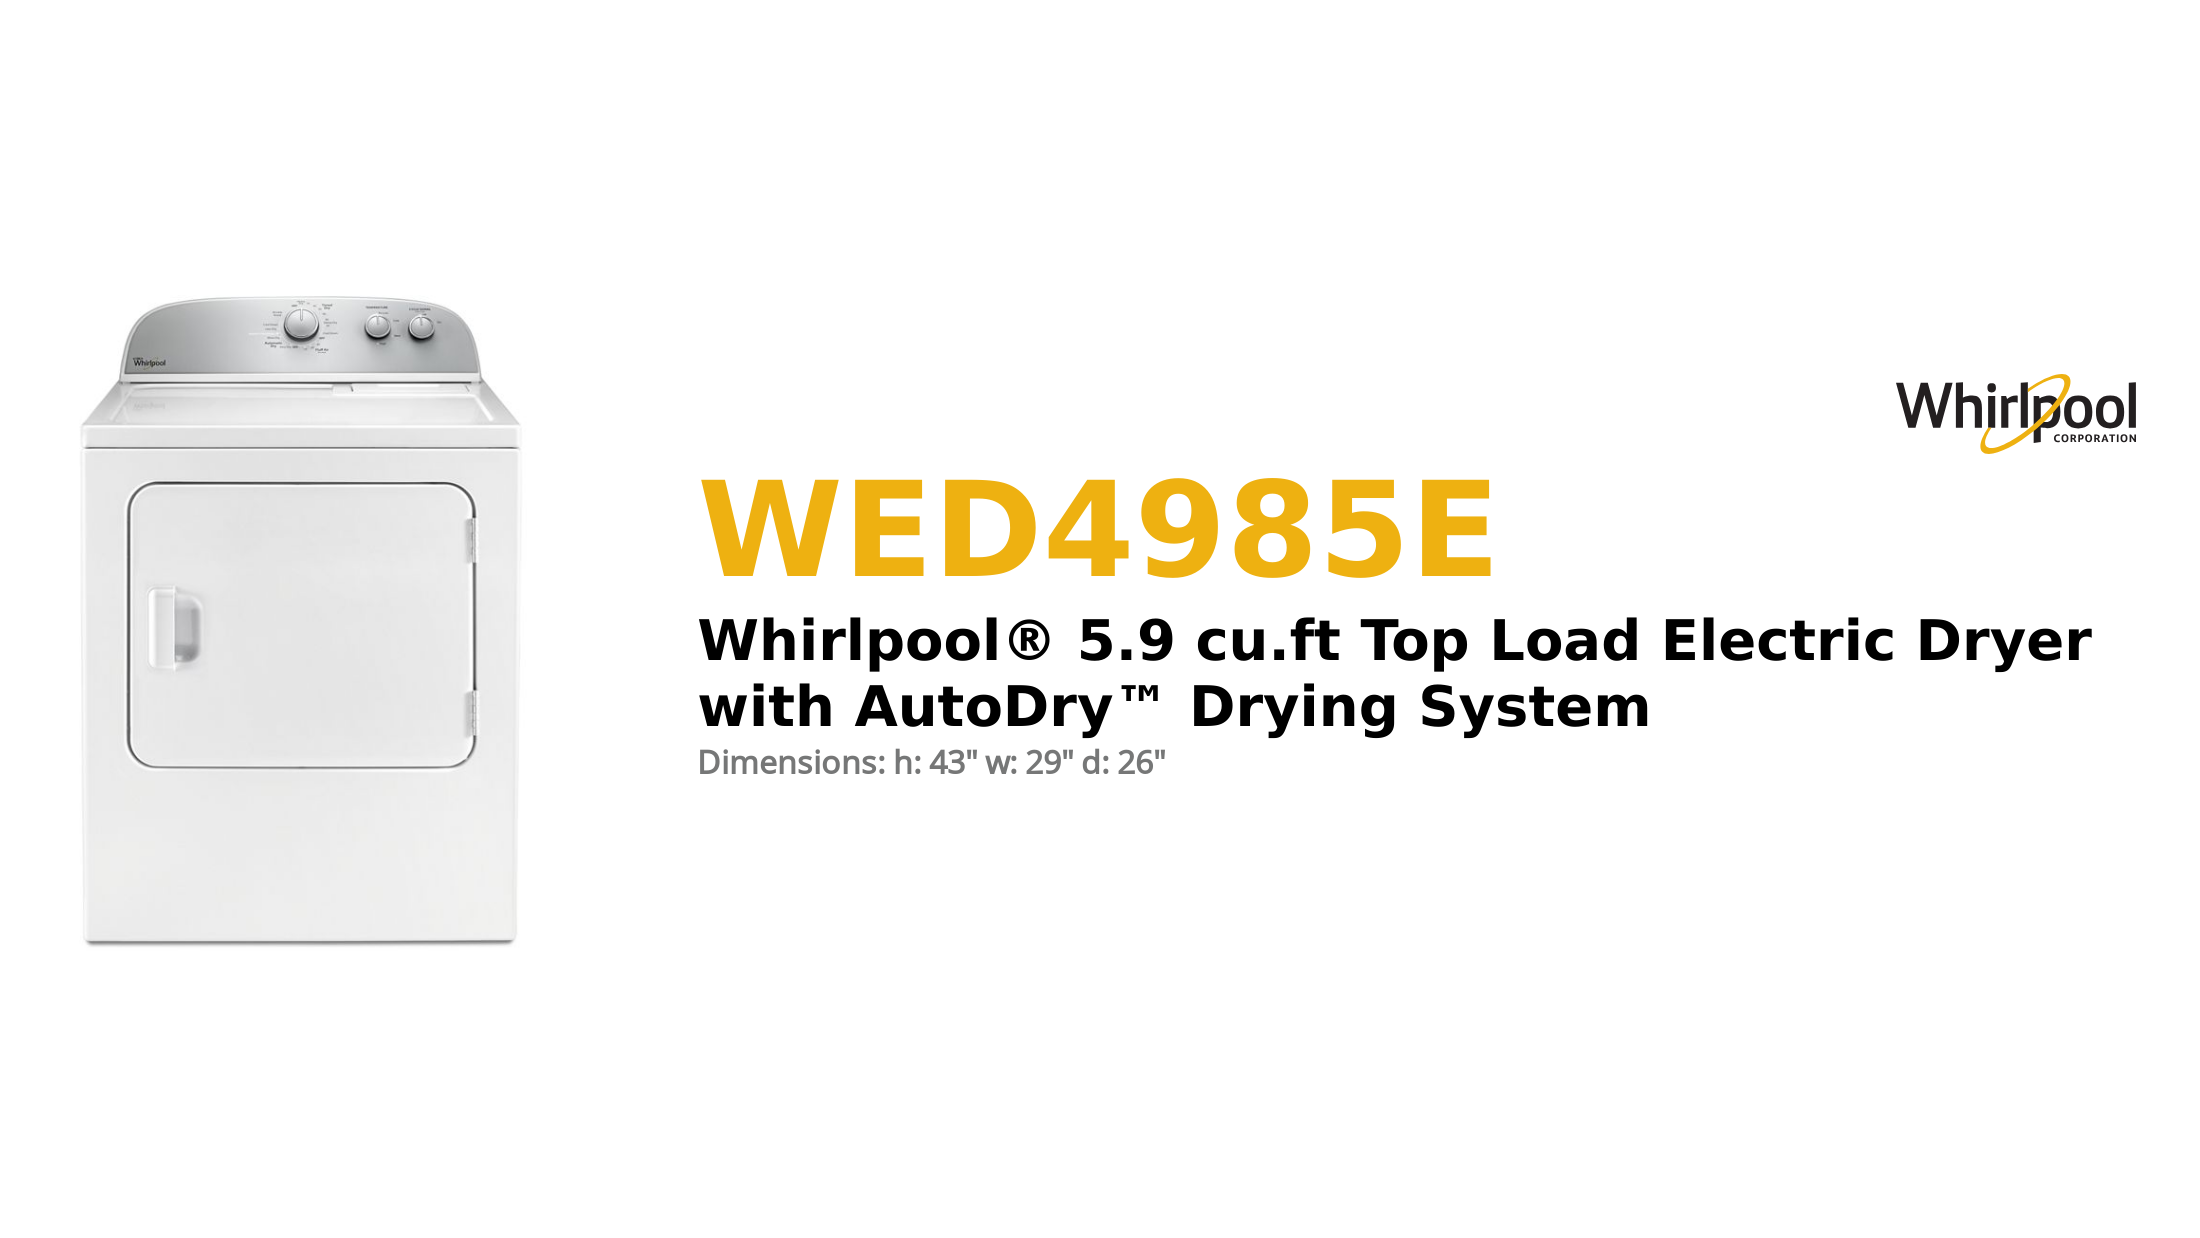 Whirlpool® 5.9 cu.ft Top Load Electric Dryer with AutoDry™ Drying System
 